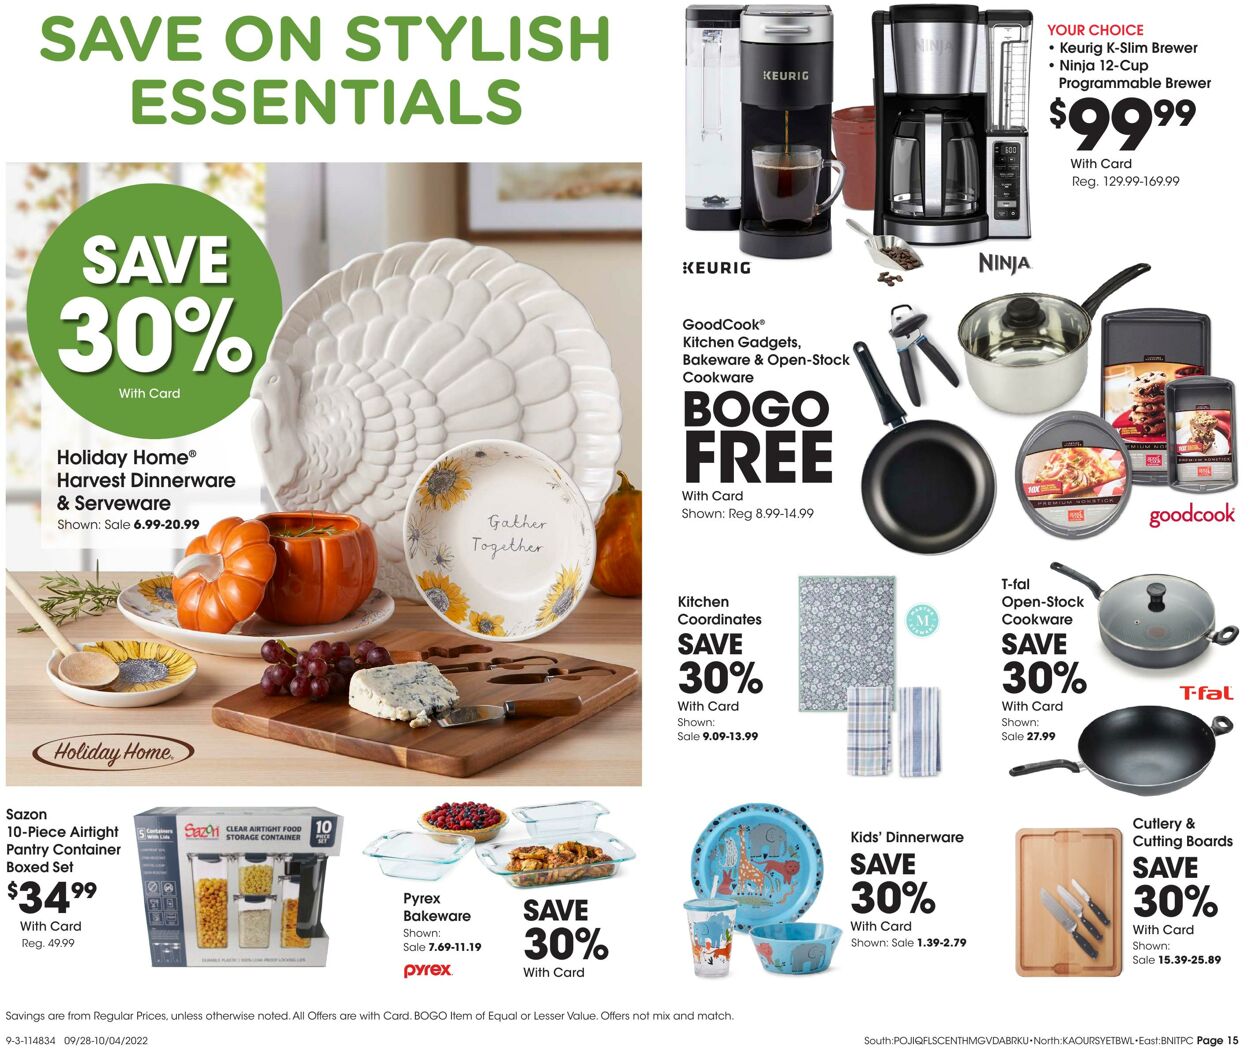 Weekly ad Fred Meyer 09/28/2022 - 10/04/2022